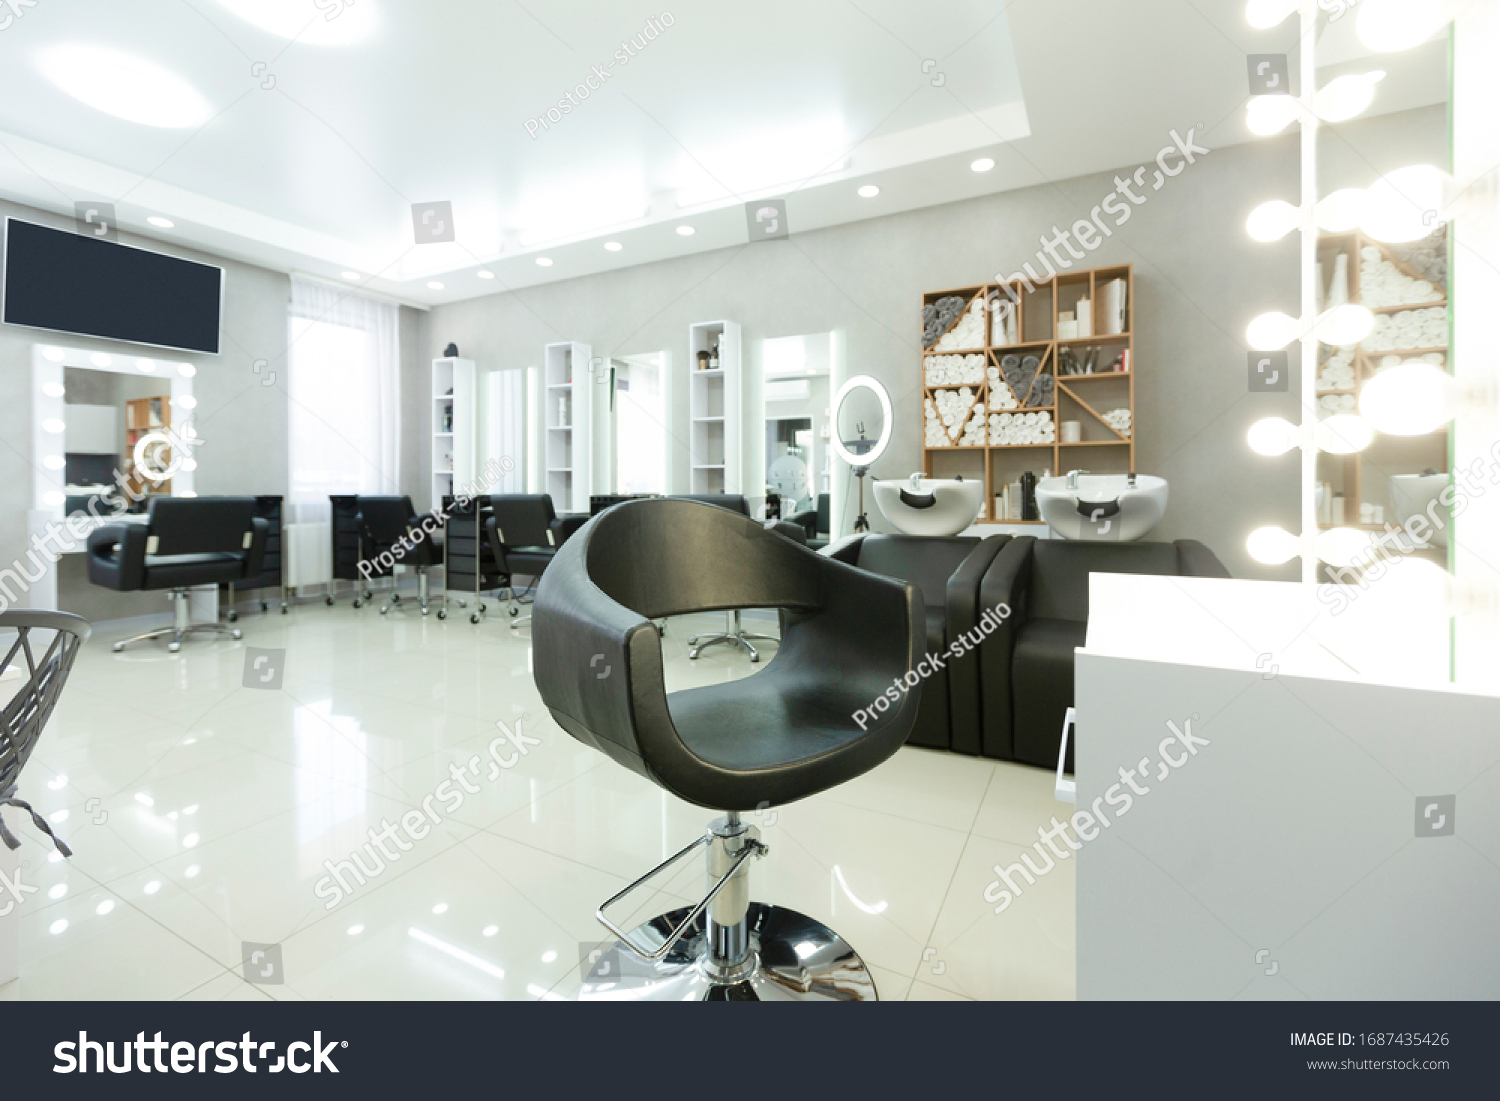 Modern empty hair saloon with chairs and mirrors, free space #1687435426